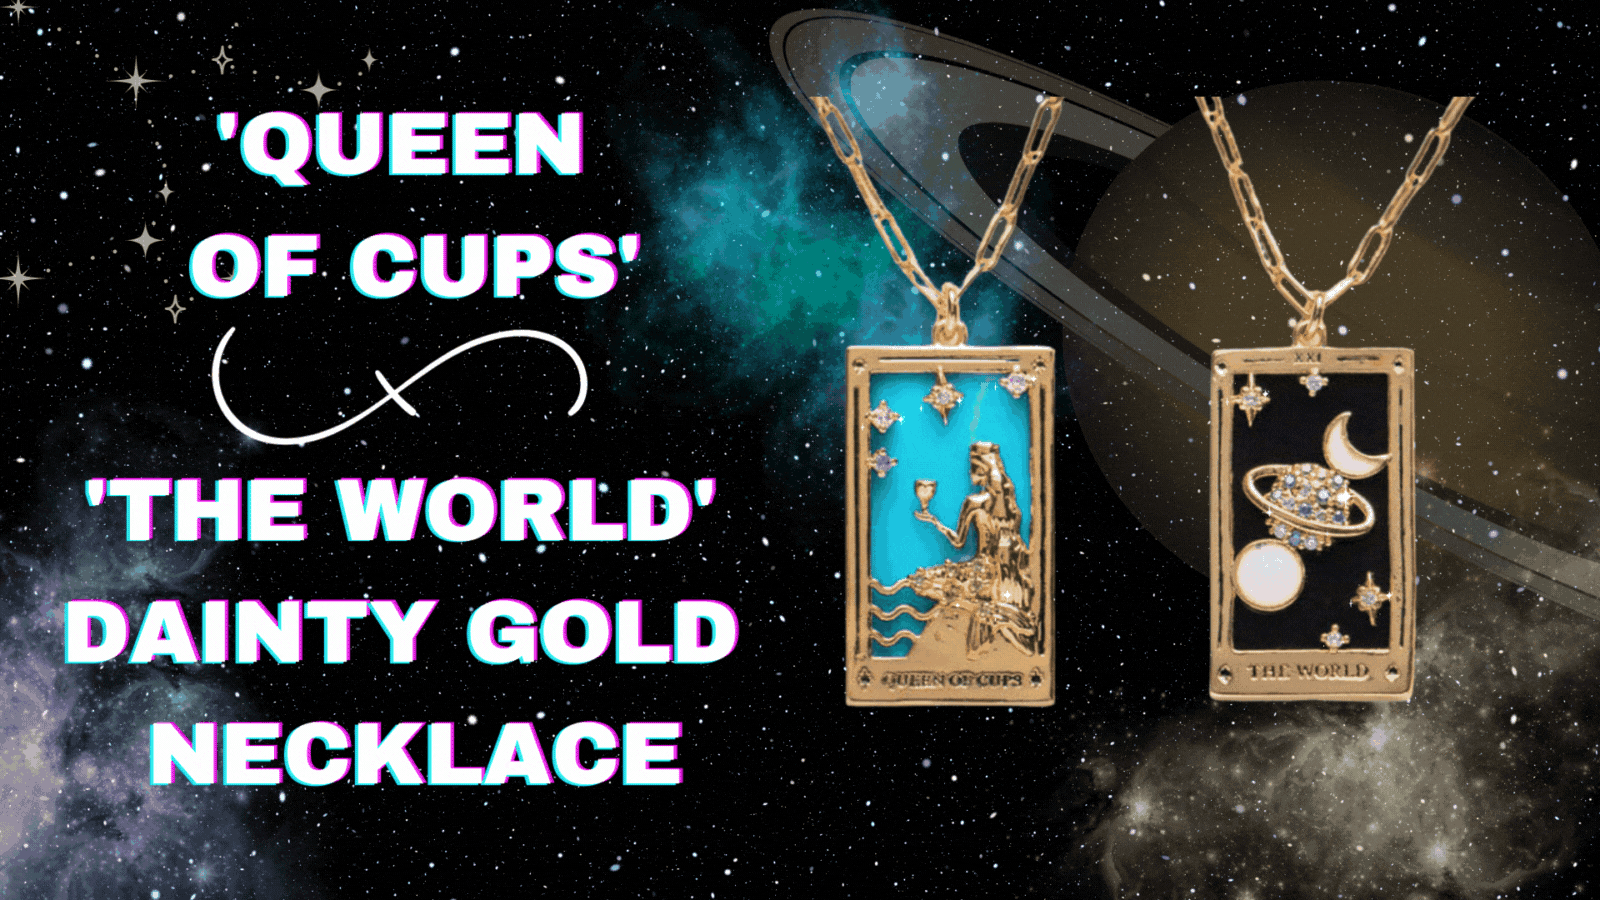 Dainty Gold 'Queen of Cups' & 'The World' Necklace